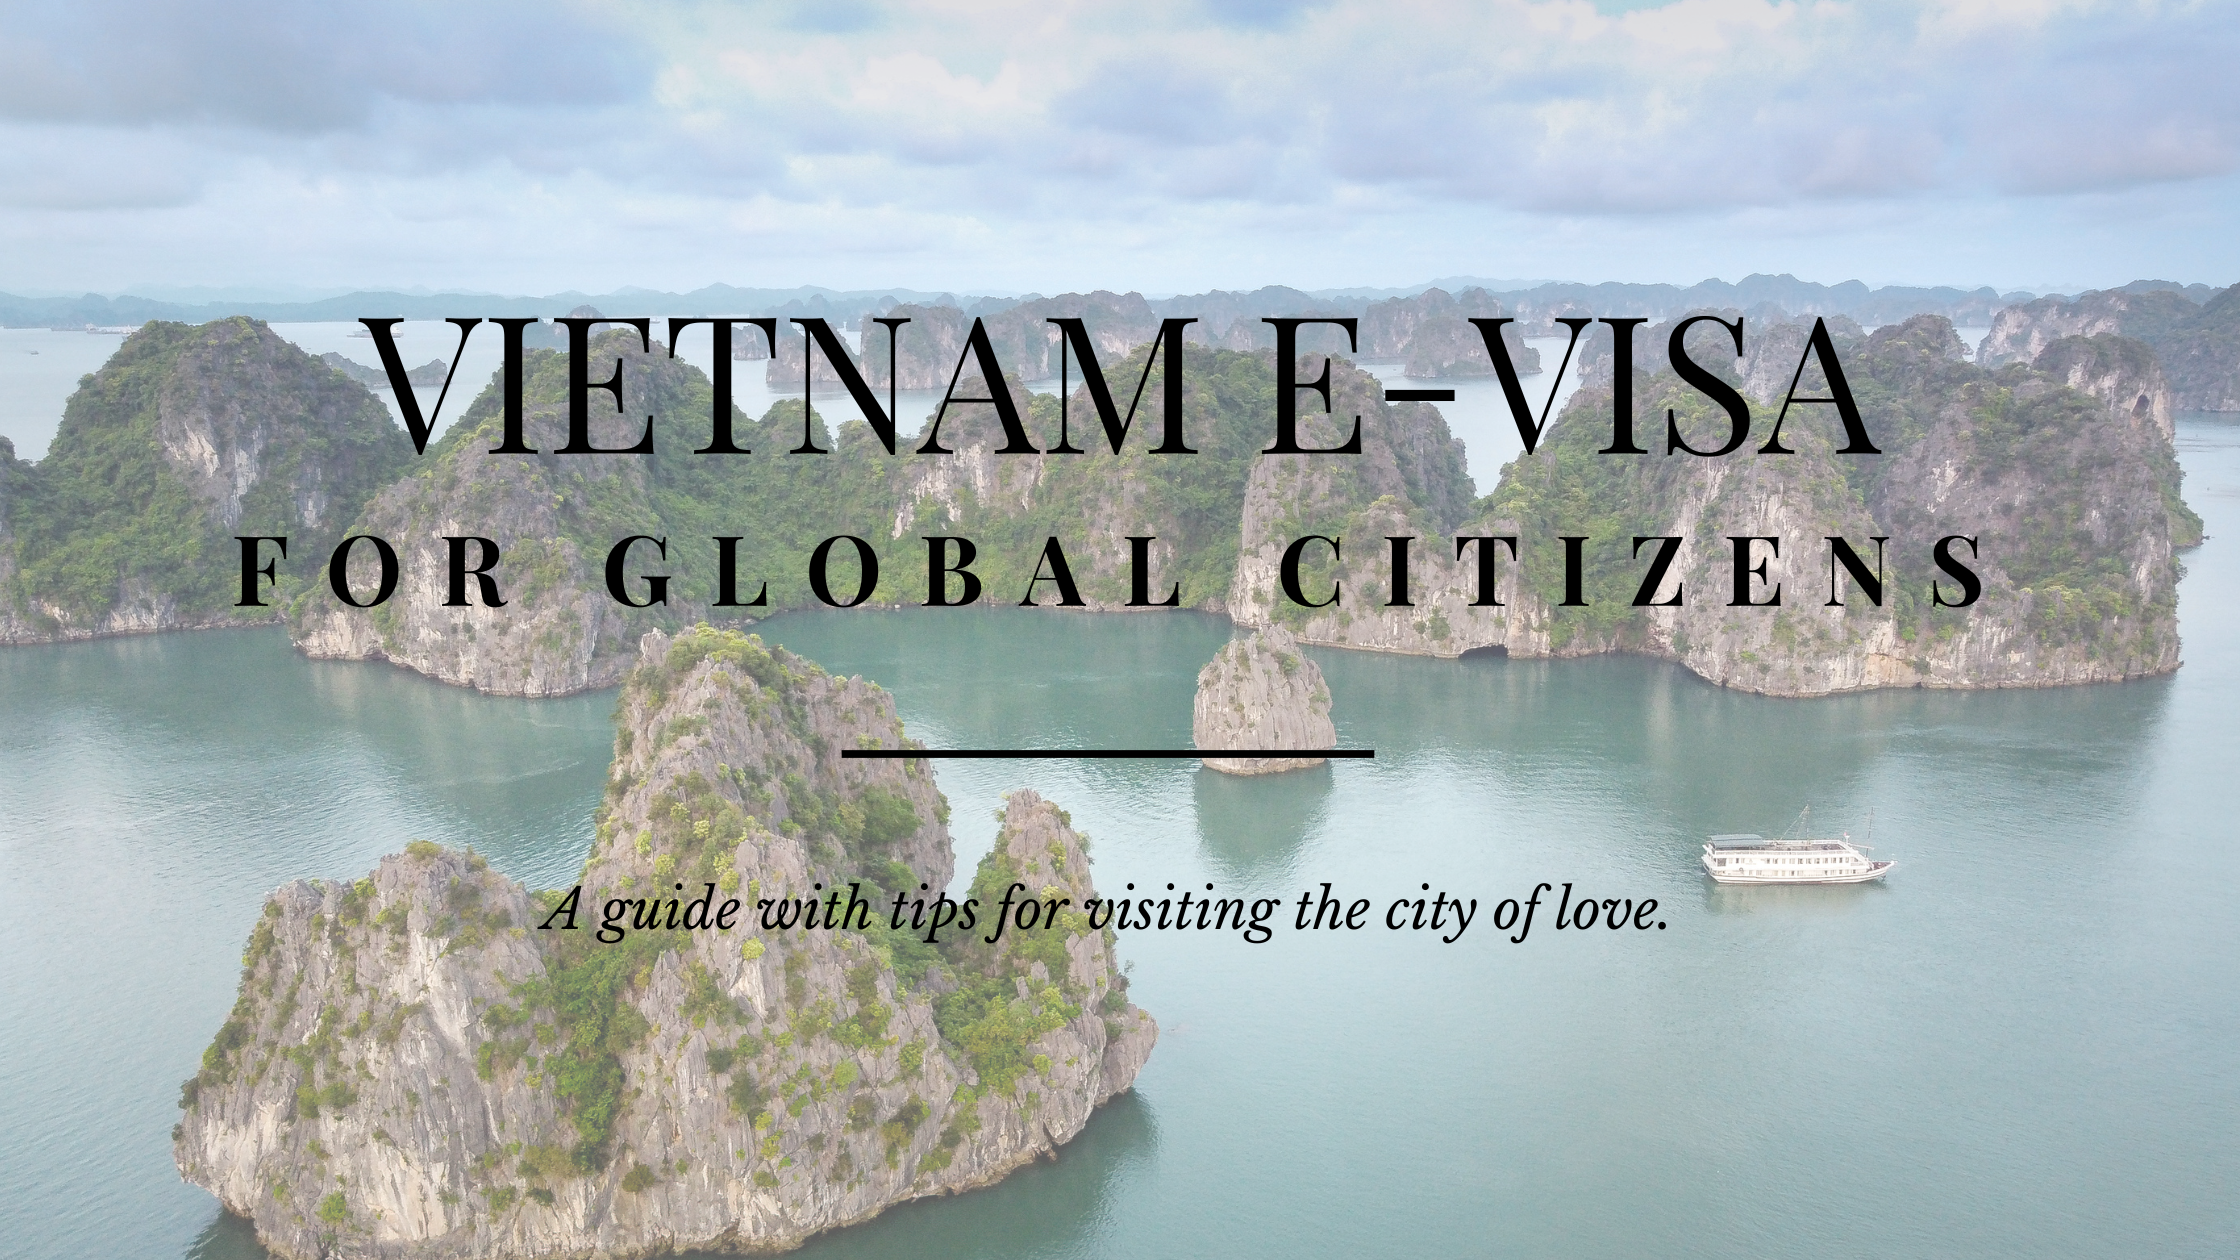 a-guide-to-vietnam-e-visa-for-indian-citizens-in-peak-seasons